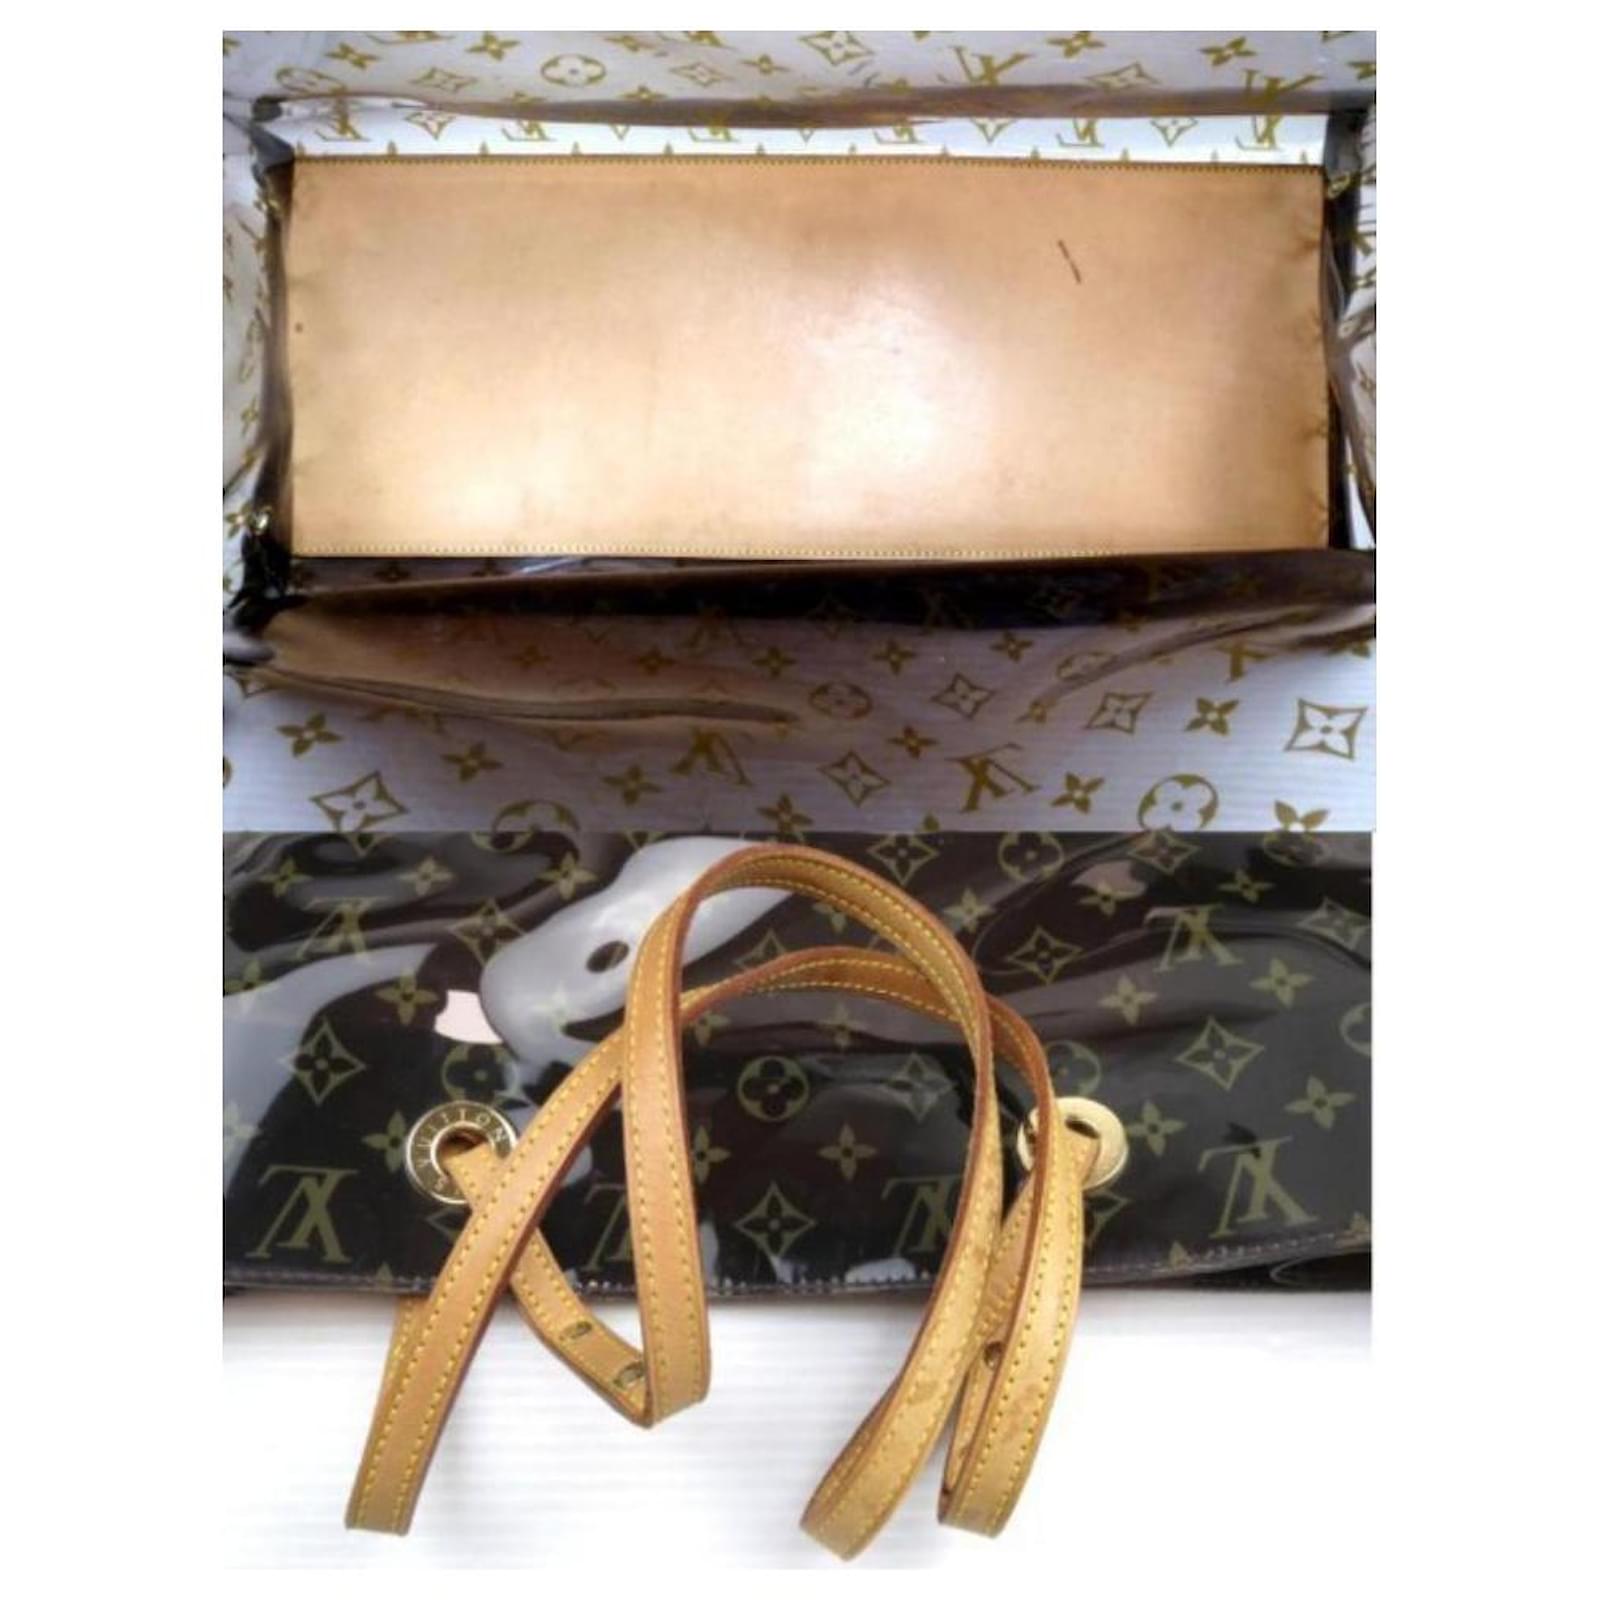 Louis Vuitton Clear Monogram Ambre Cabas Cruise GM Tote Bag with